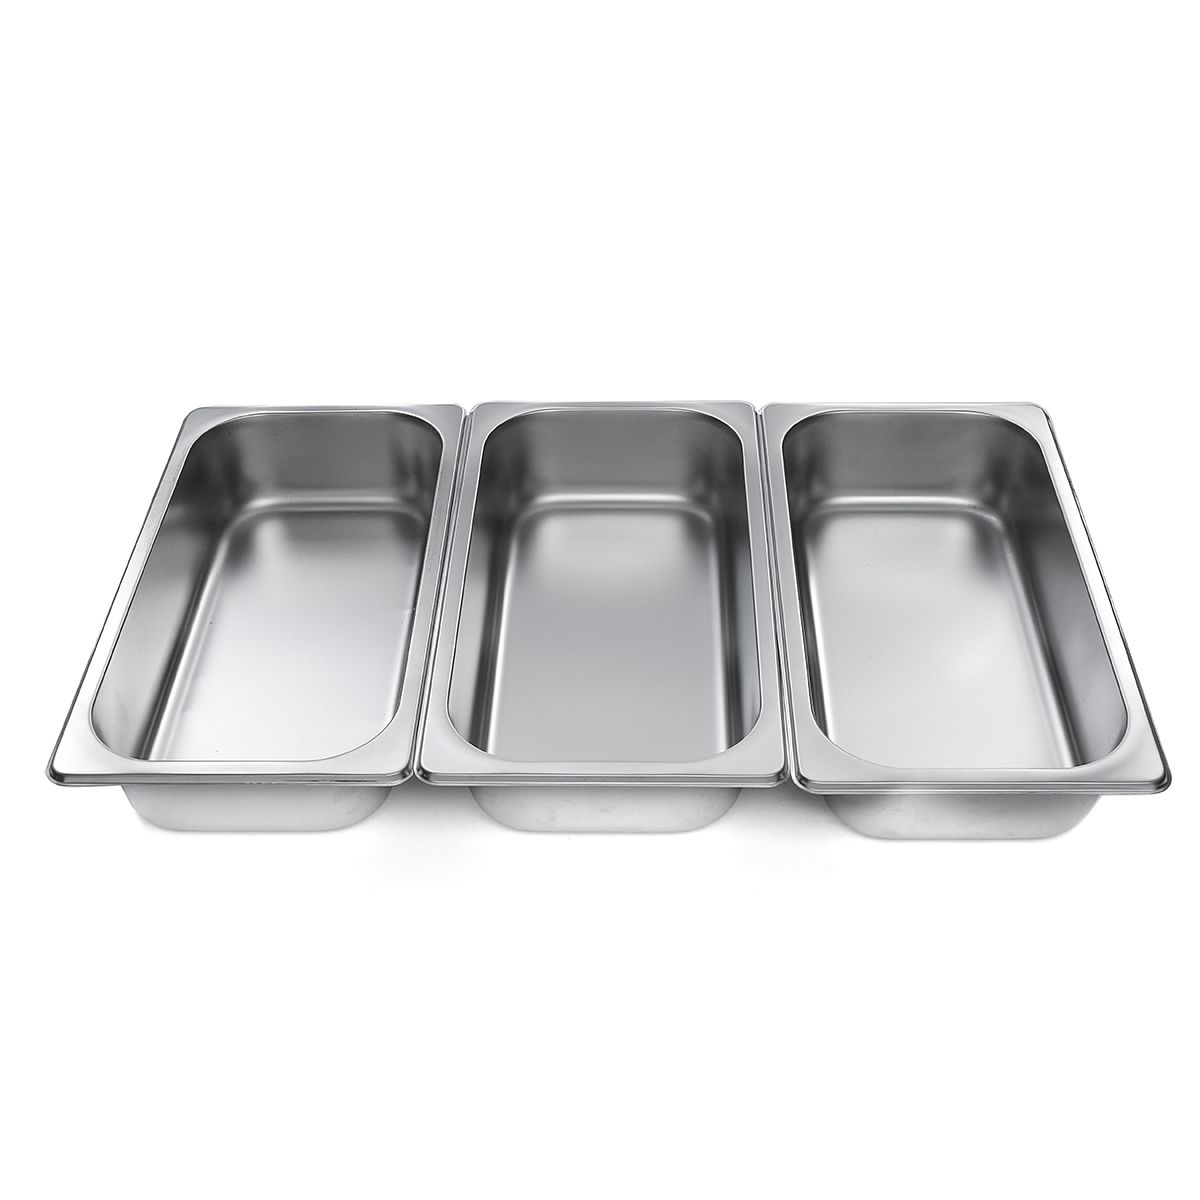 3-Plates-Chafing-Dish-Tray-Buffet-Heating-Stove-Caterer-Warmer-Stainless-Steel-1525766